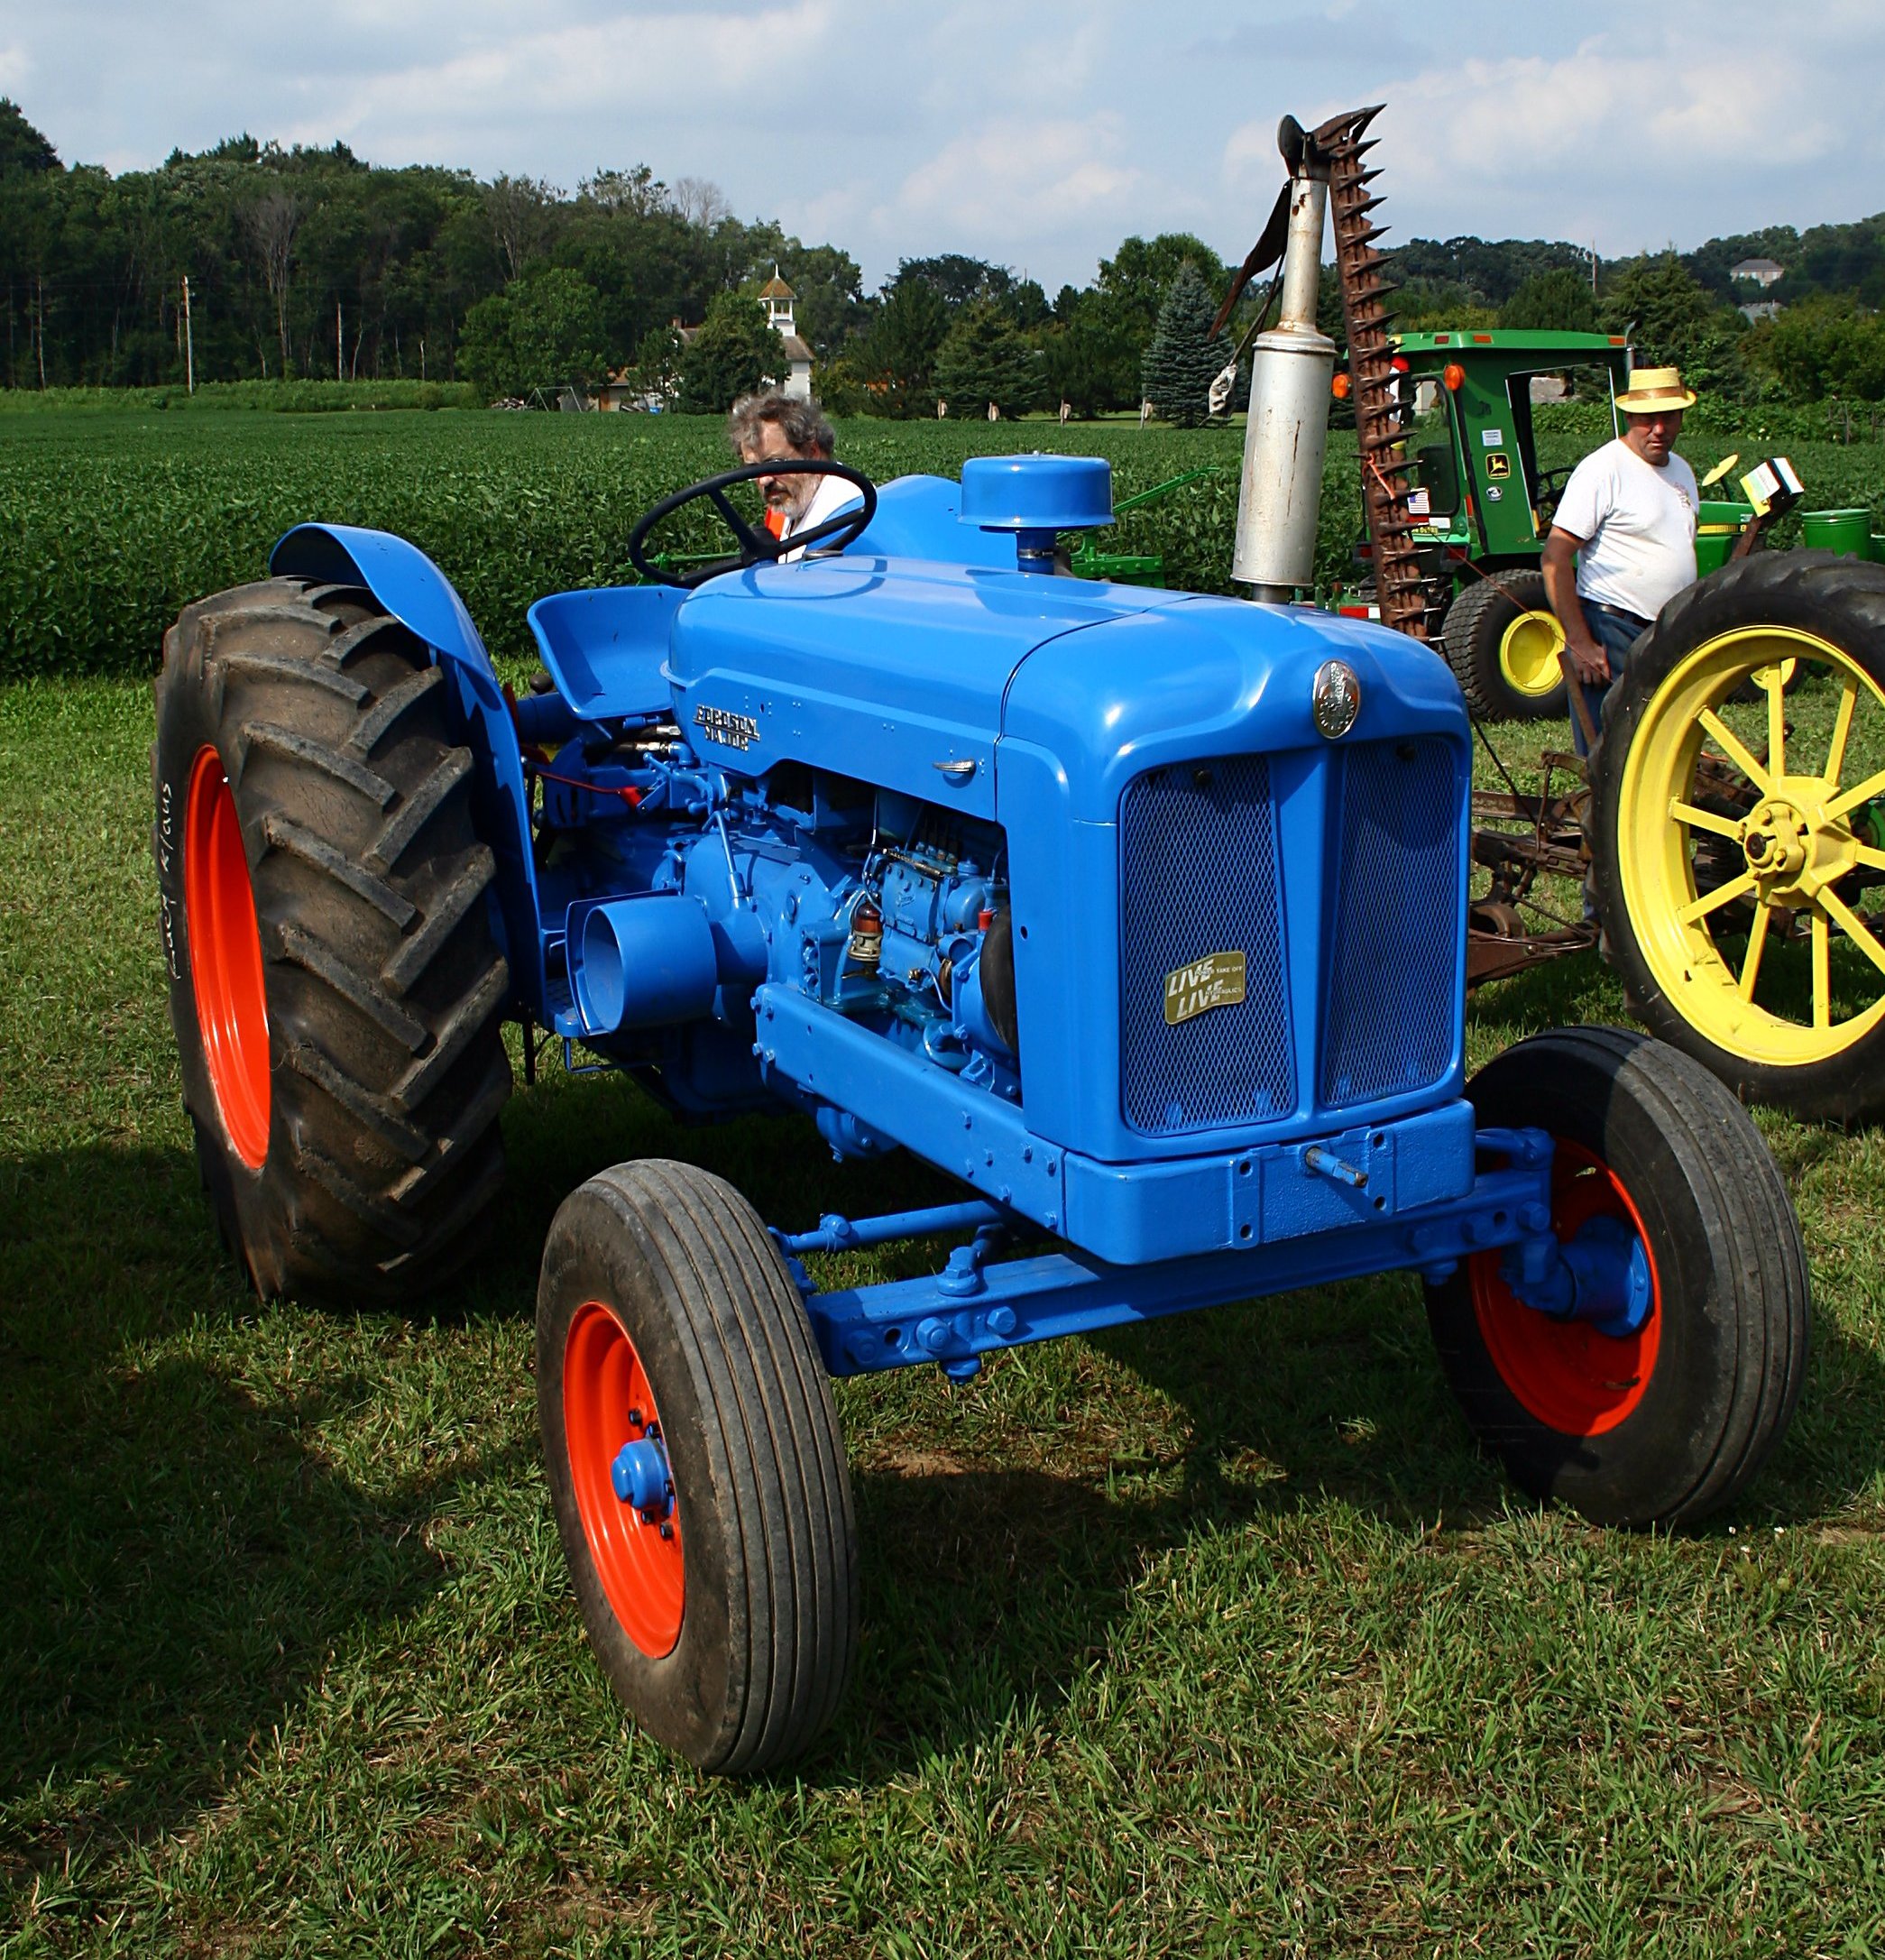 fordson major - group picture, image by tag - keywordpictures.com